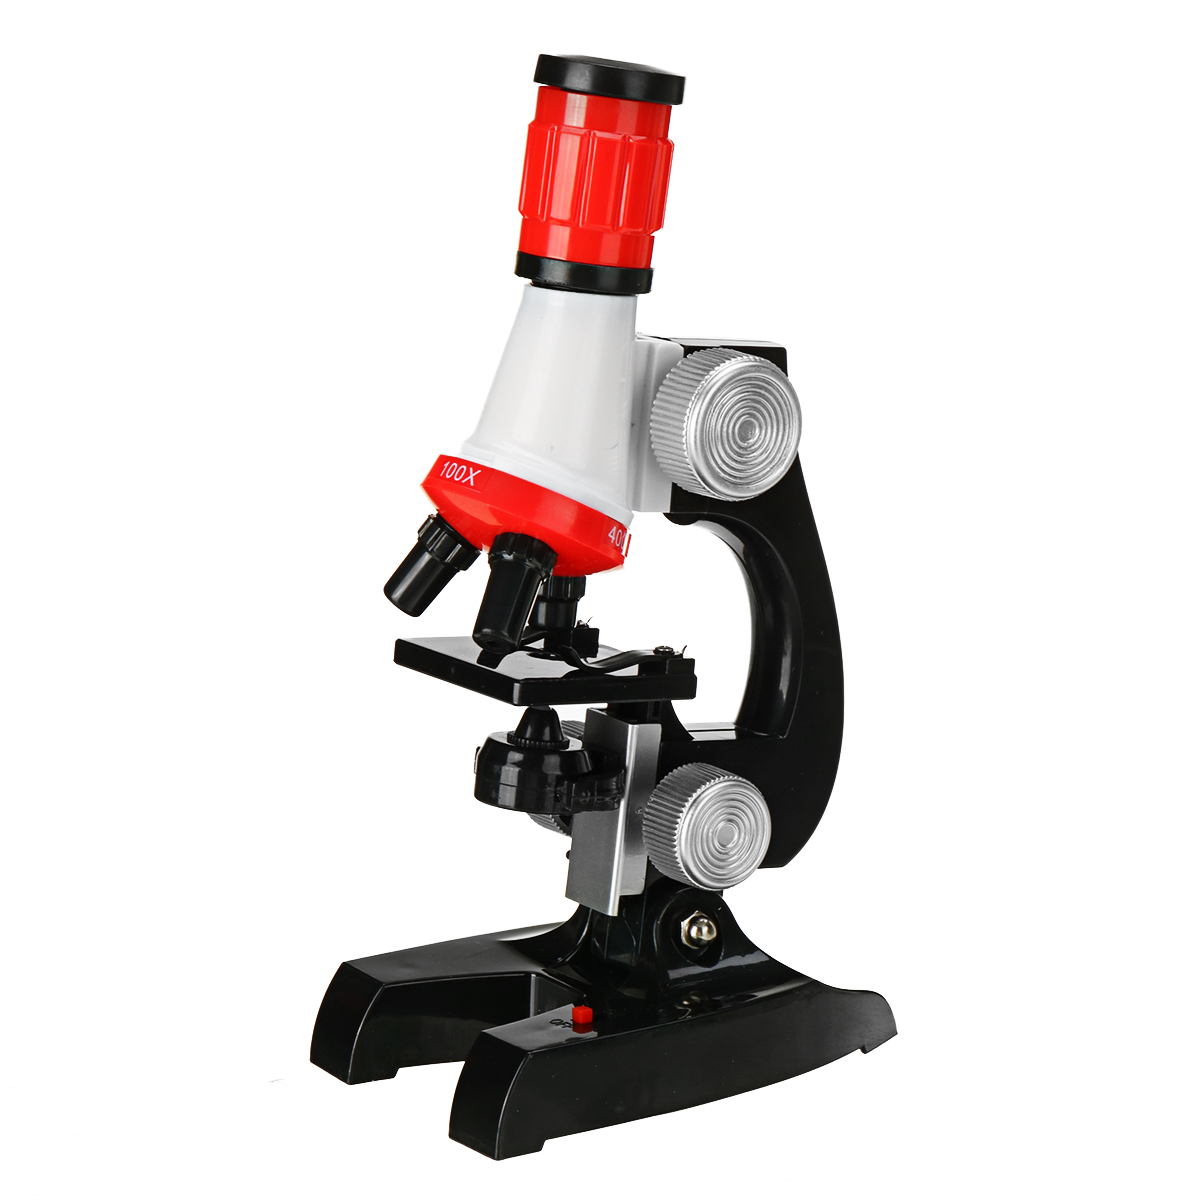 Children-Biological-Microscope-Kit-Lab-LED-100X-400X-1200X-Home-School-Science-Educational-Toy-Gift--1903472-6